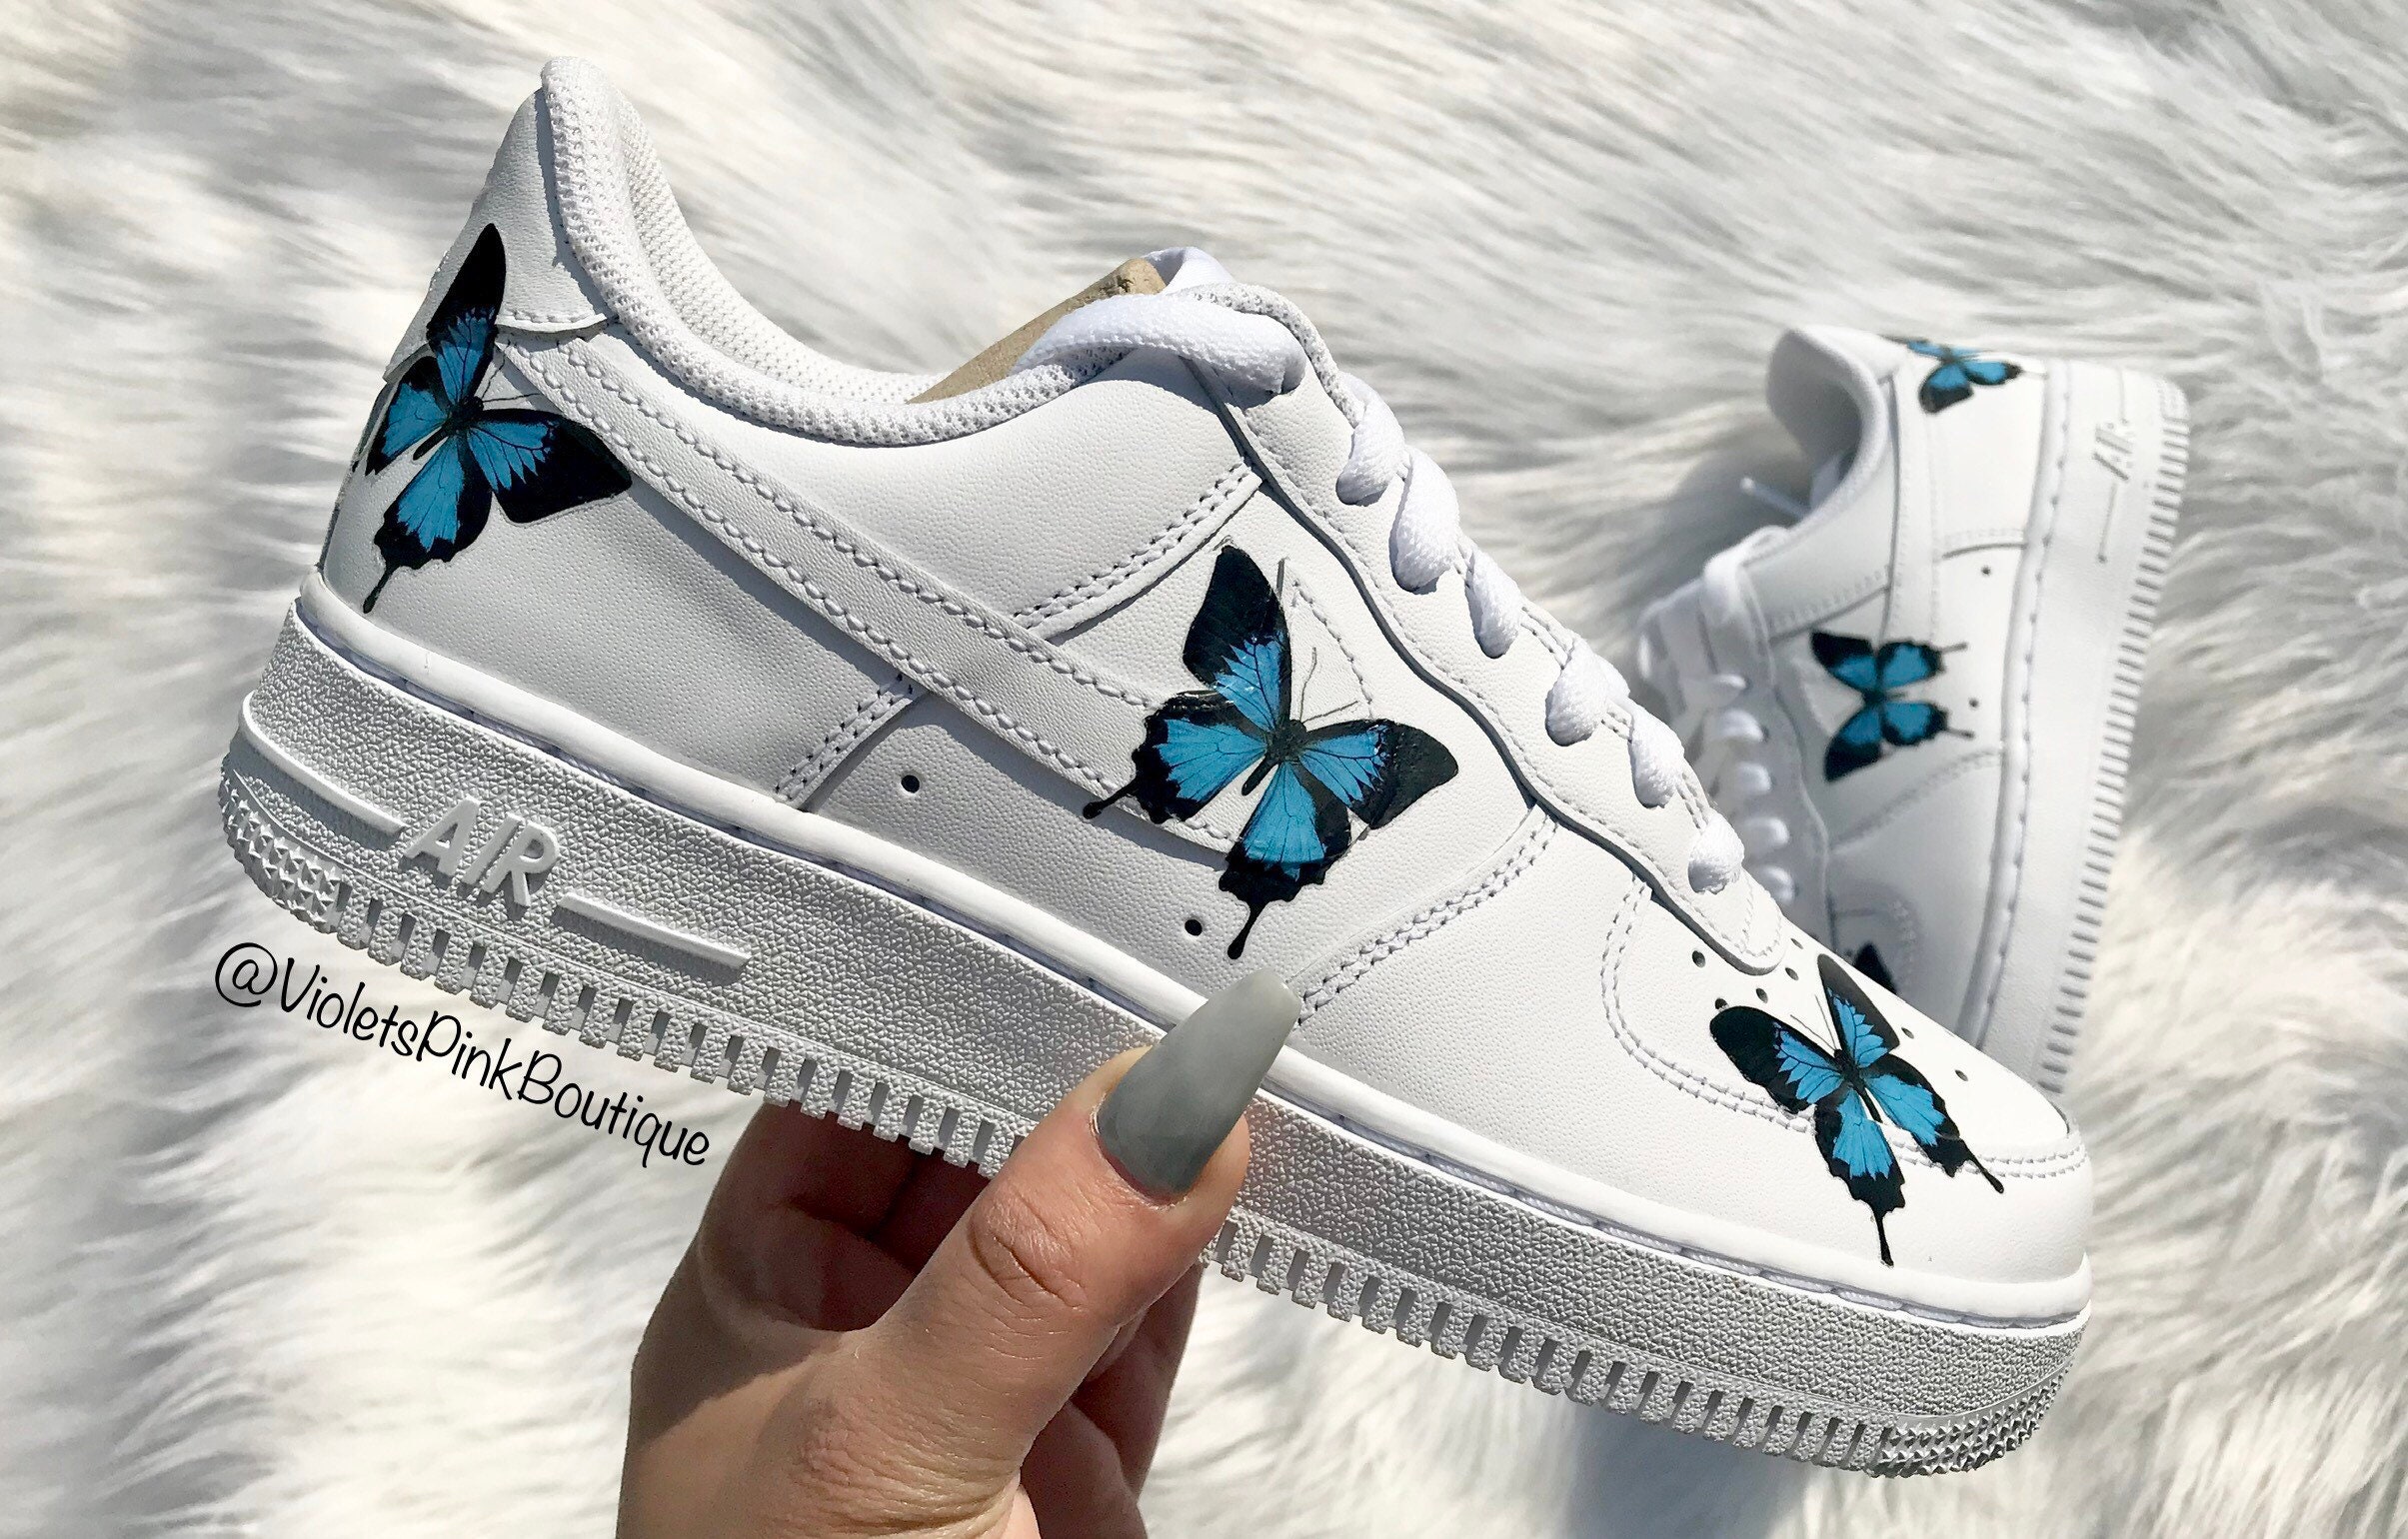 custom butterfly air force ones